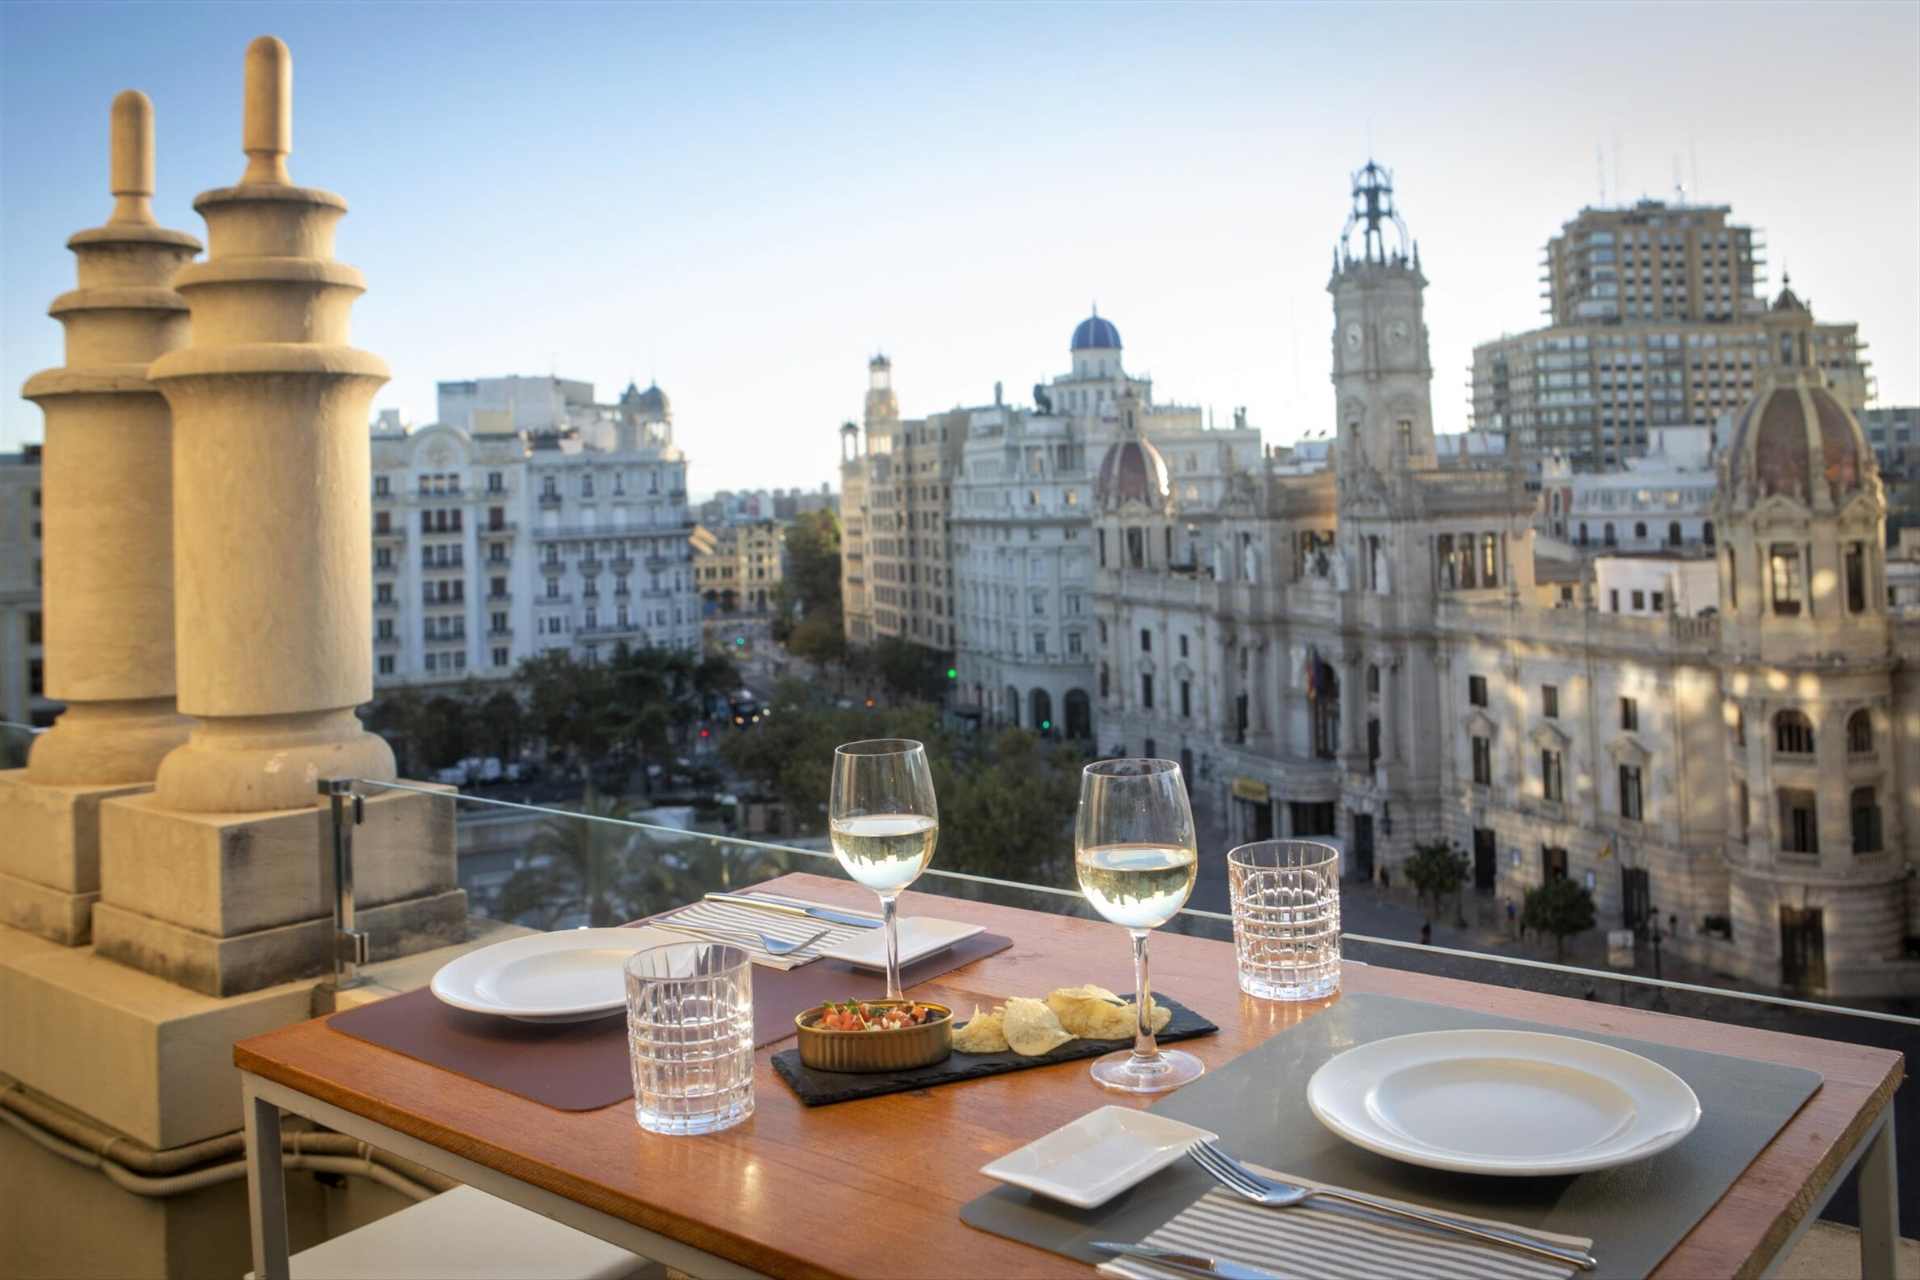 two-glasses-of-white-wine-on-rooftop-bar-overlooking-square-2-days-in-valencia-itinerary